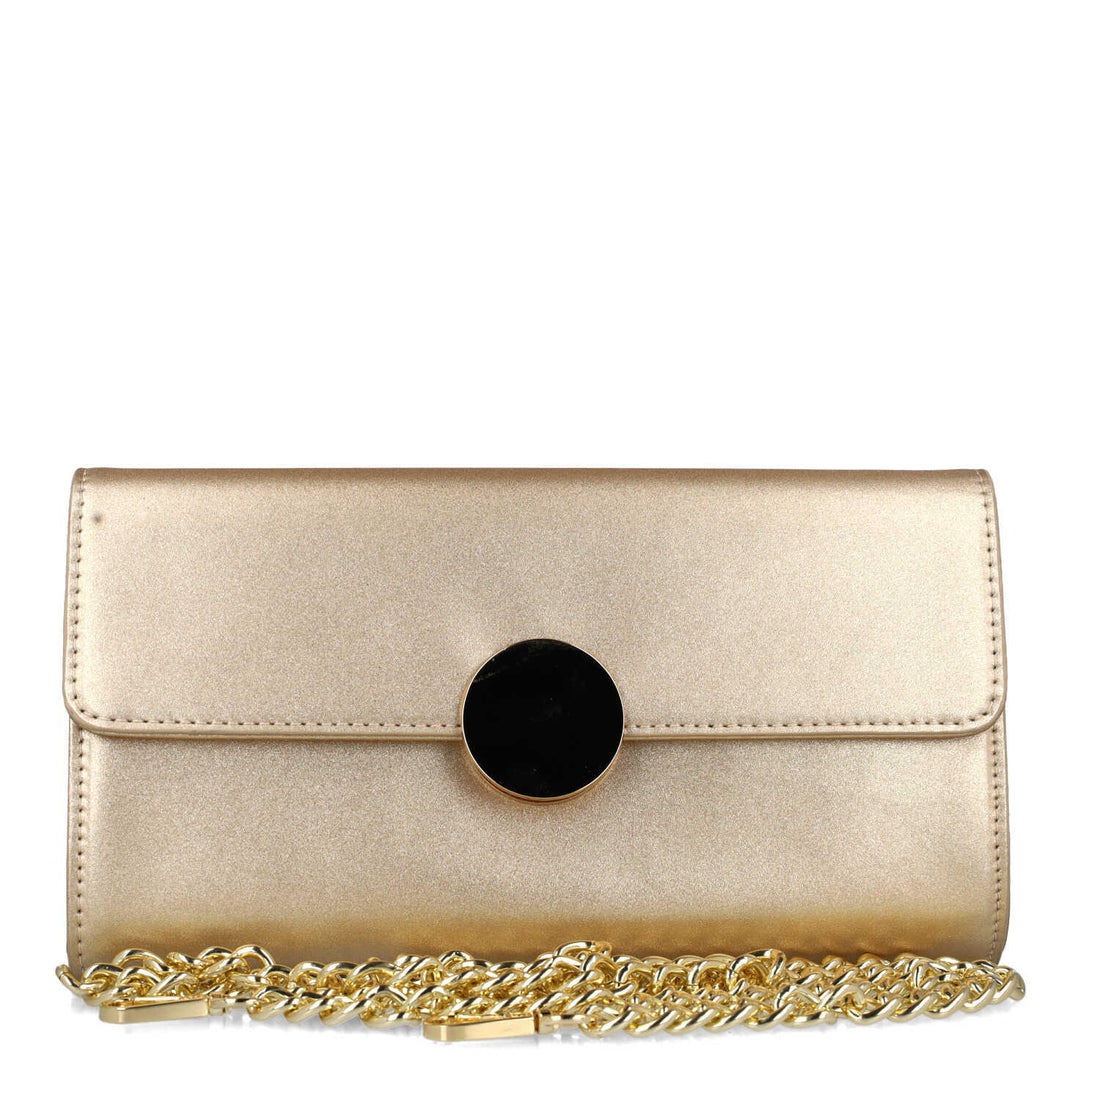 Gold Clutch Bag With Chain Strap_85712_00_01